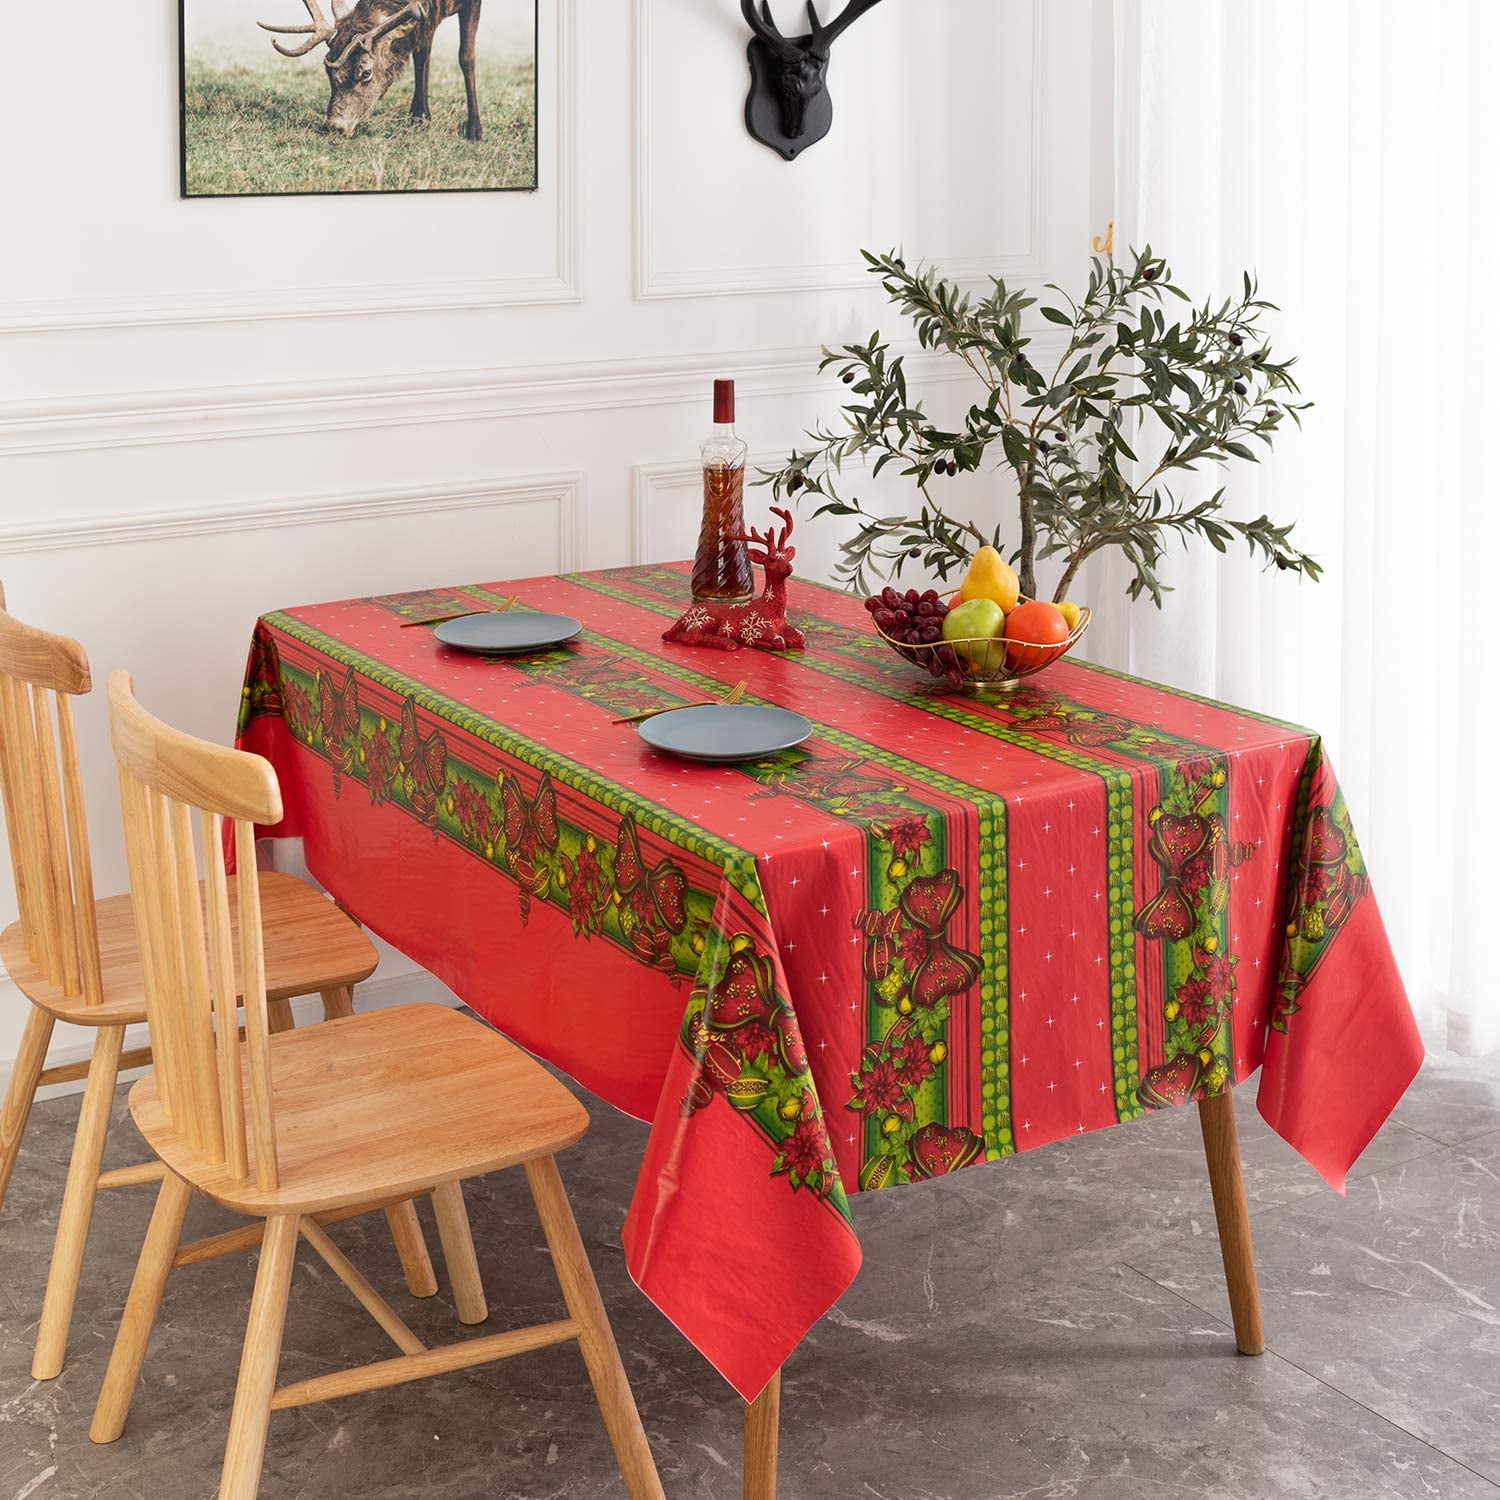 Swedish Kitty Cats Tablecloth Waterproof Wrinkle Wipeable Rectangle Table Cloths for Kitchen Picnic Party 54X72 Inch